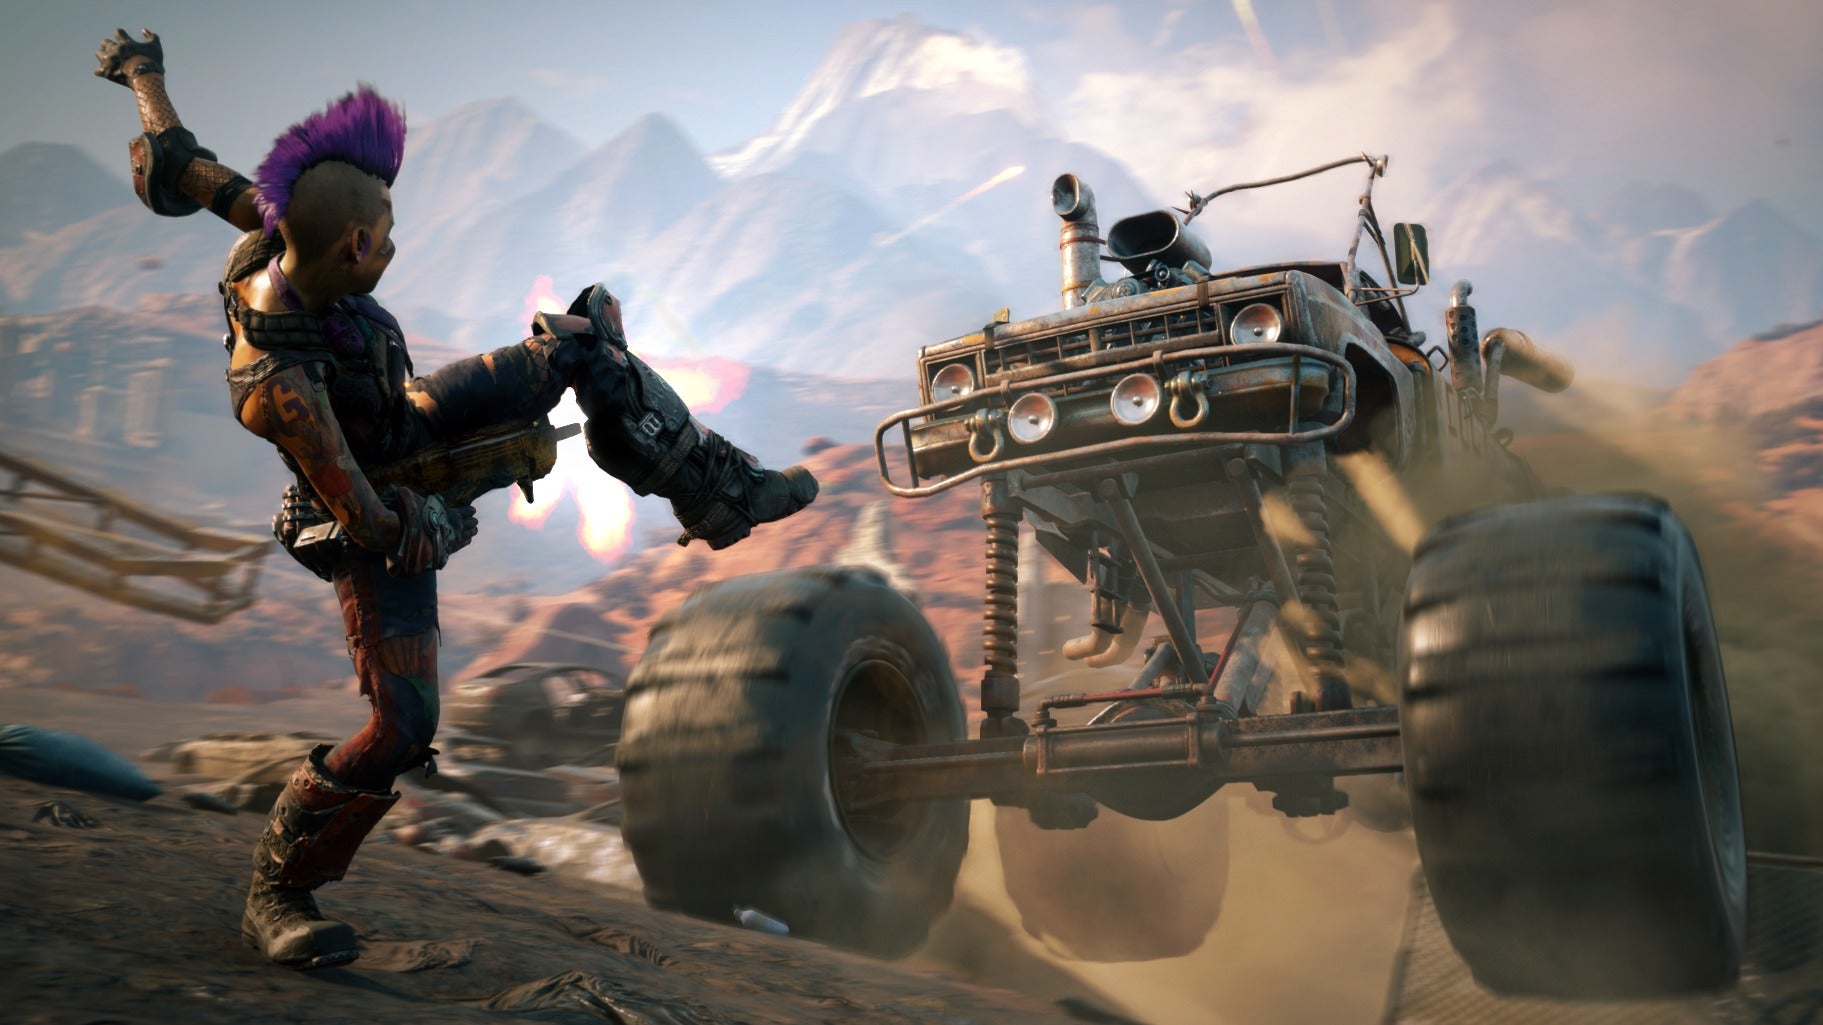 Image for Rage 2's Vehicle Combat Needs Some Tuning, but is Already Producing Wild Gameplay Sequences